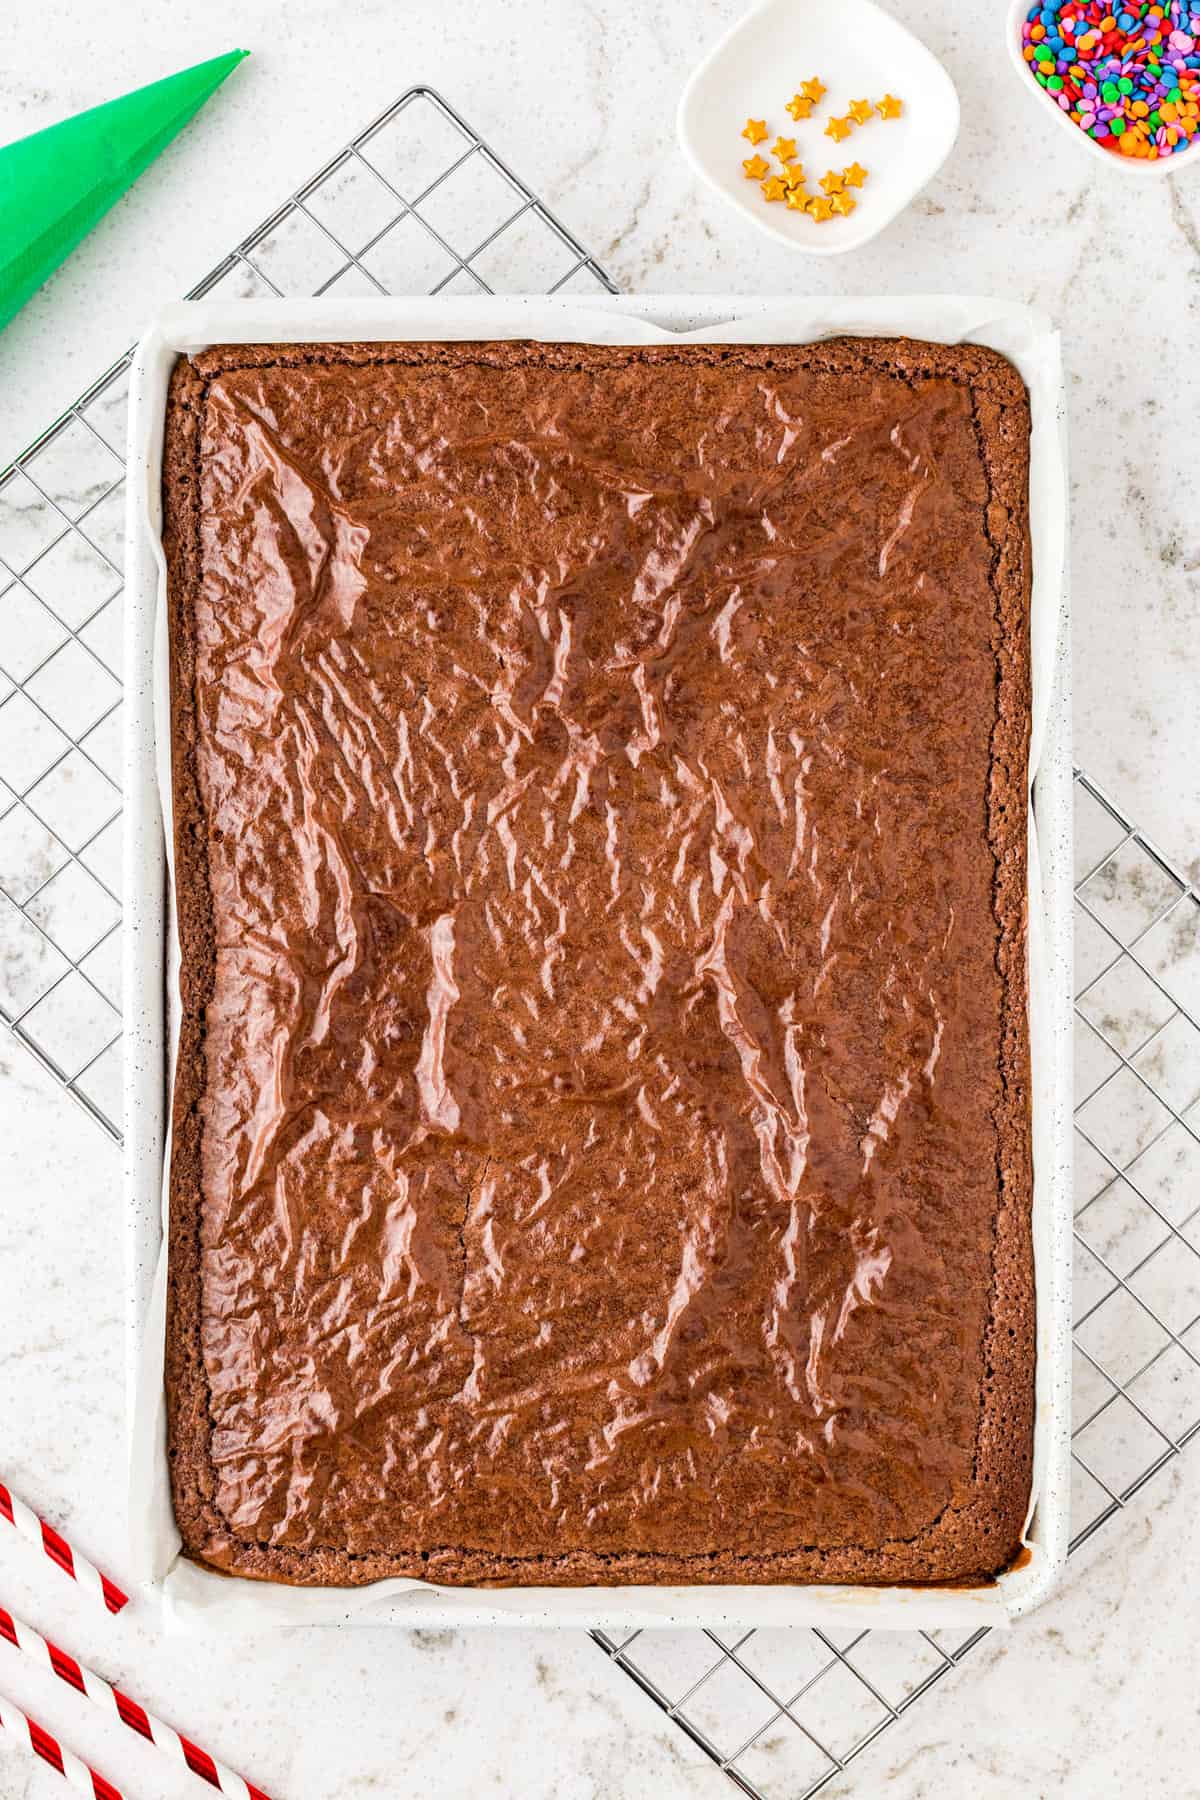 Once Brownies are done, Take them Out of the pan to cool on a cooling rack.